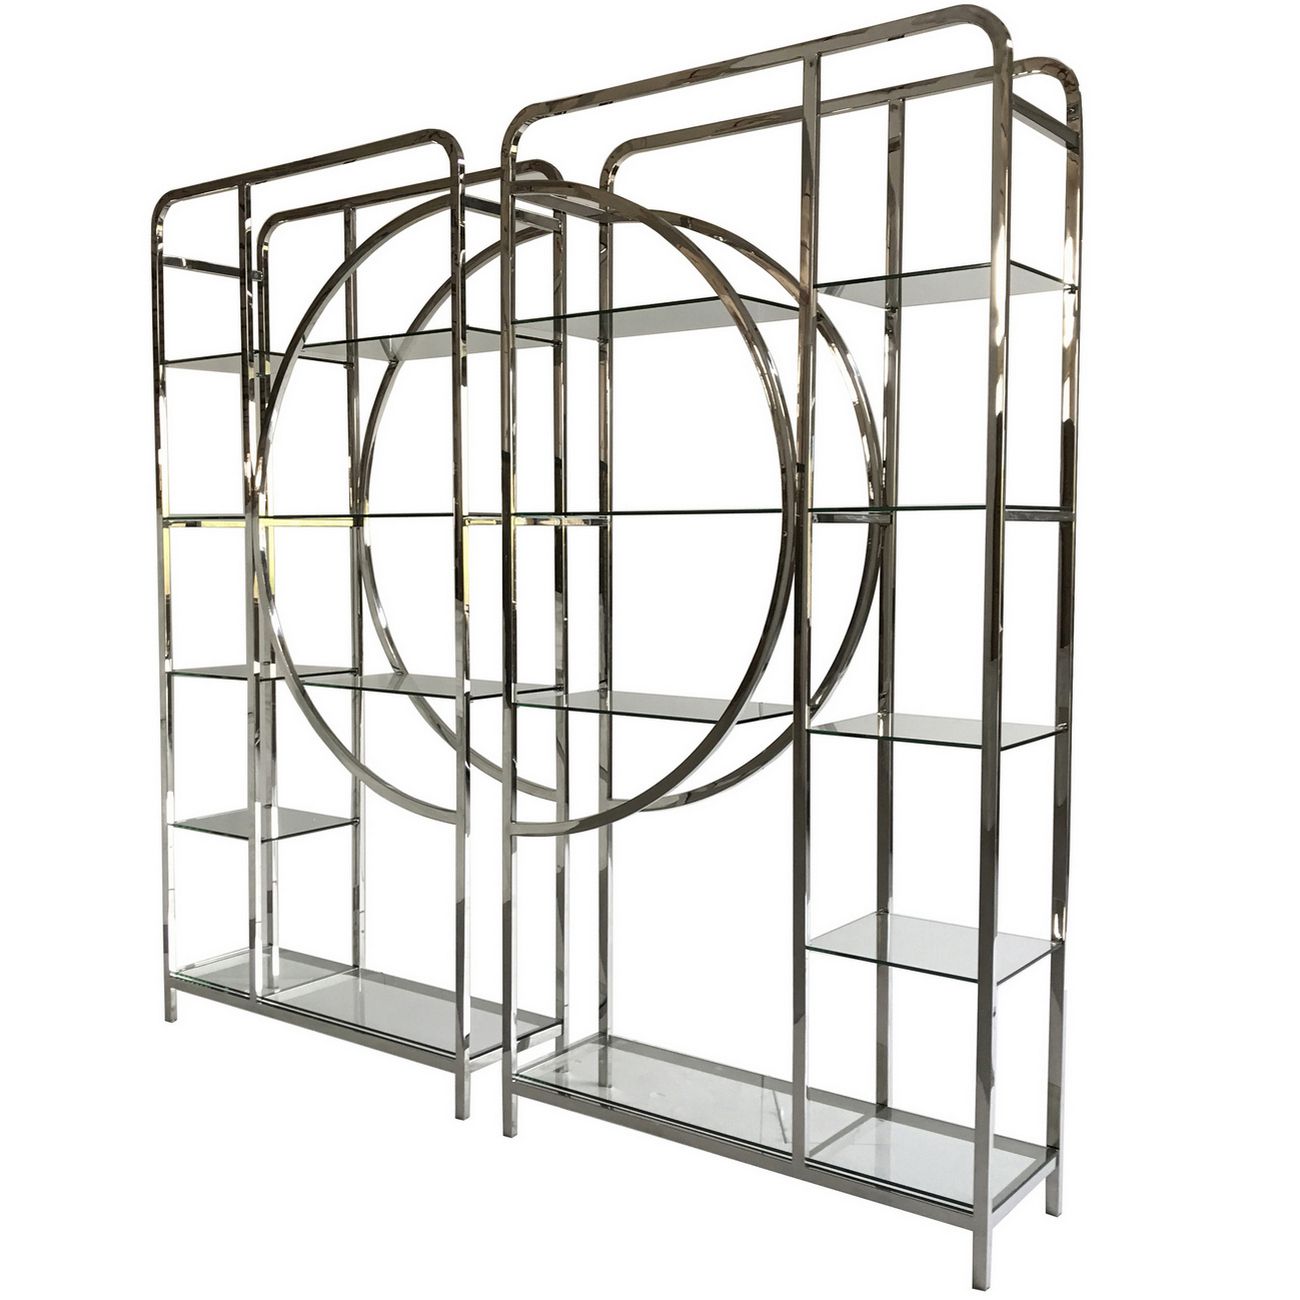 Gatsby Steel Decadence Shelving Units (Set of 2) ( DISPLAY ONLY)